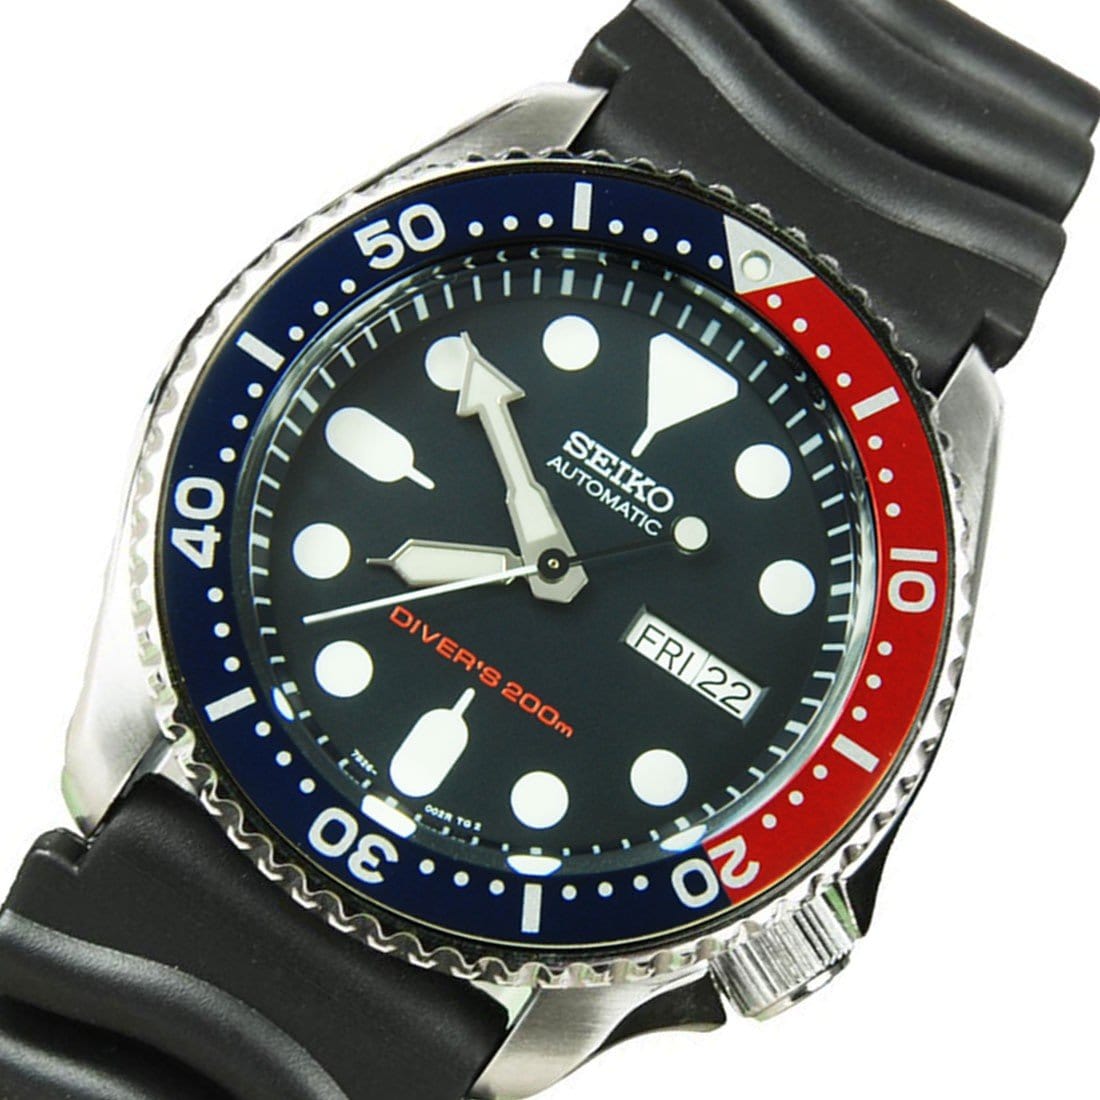 SKX009K1 SKX009K Seiko Automatic Day Date Male Divers Watch with Extra Strap